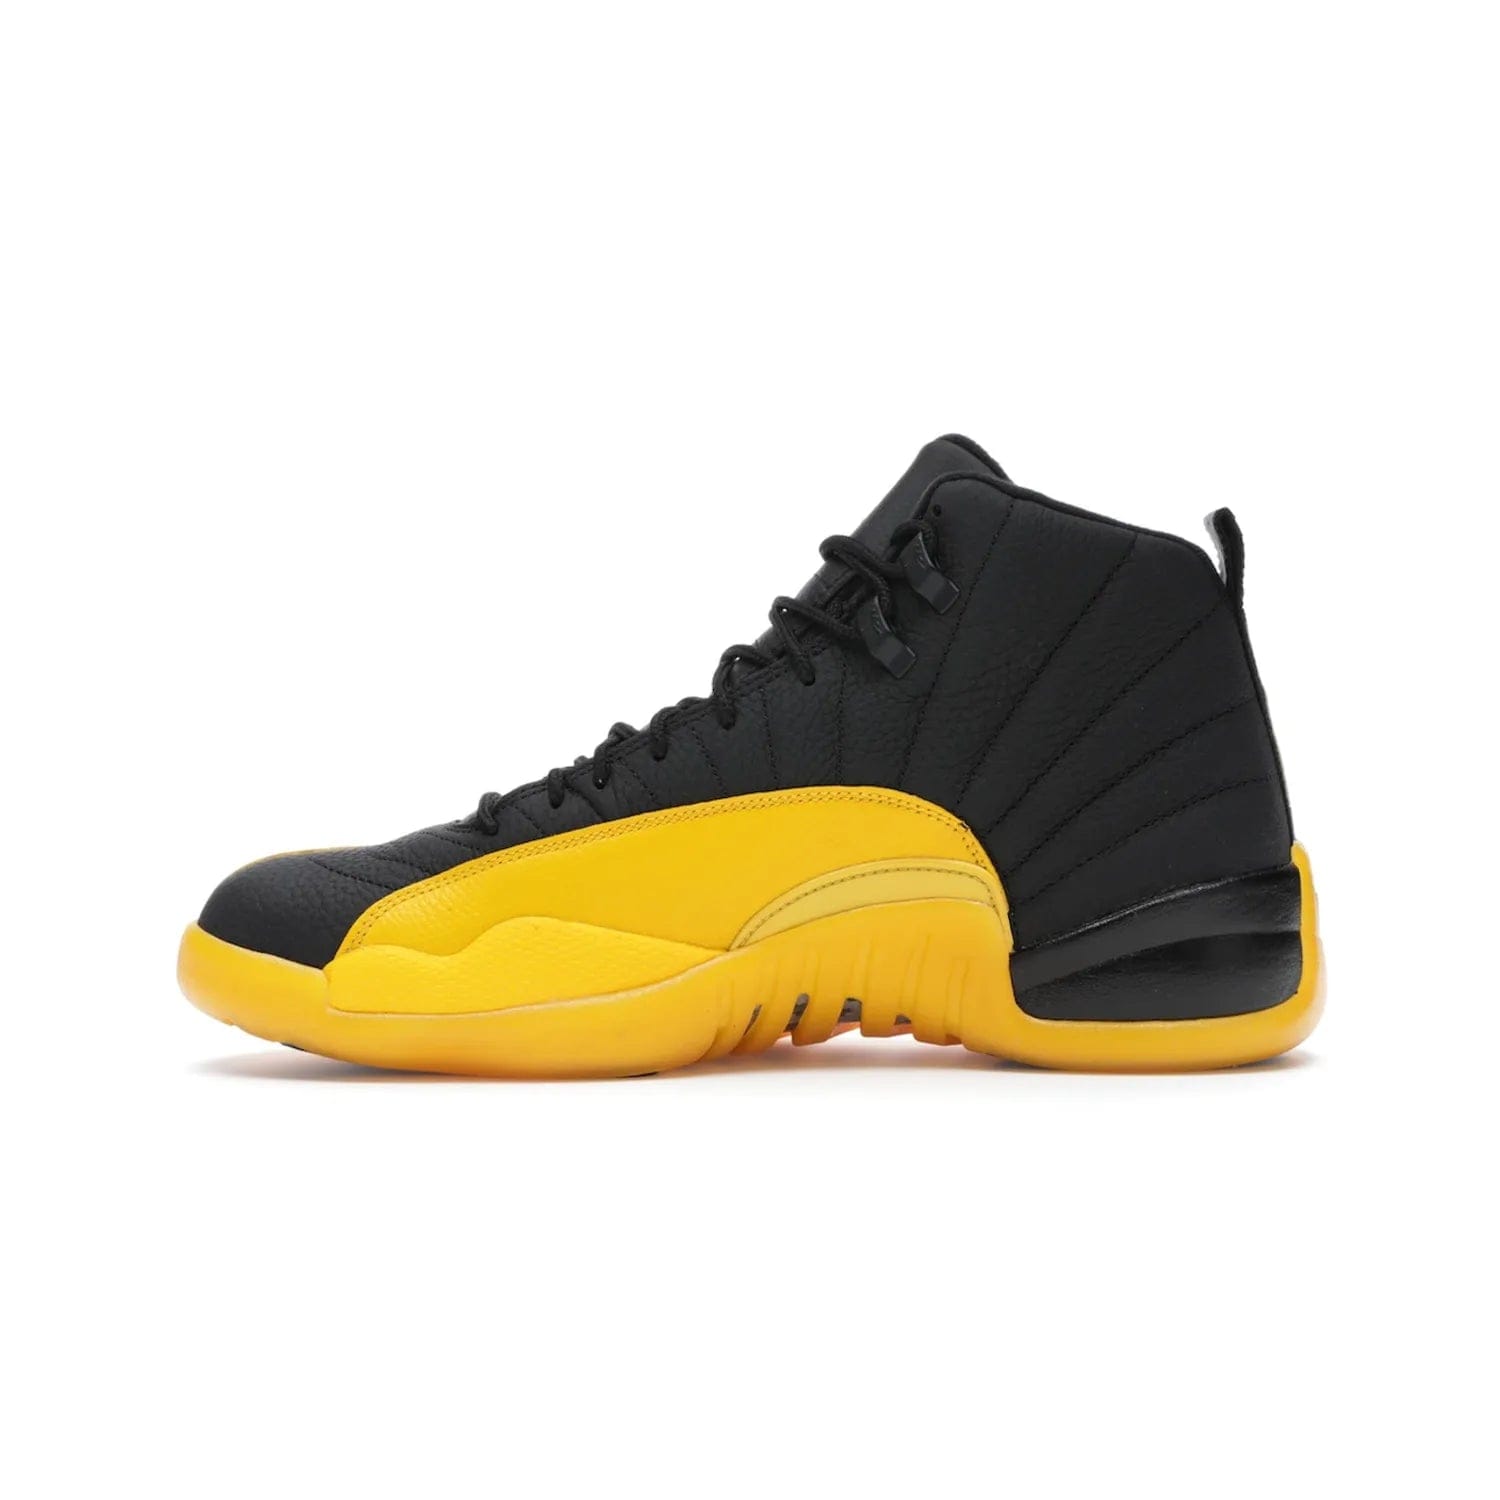 Jordan 12 Retro Black University Gold - Image 19 - Only at www.BallersClubKickz.com - This Jordan 12 Retro features a black tumbled leather upper and University Gold accents for a modern twist. Boasting Jordan "Two Three" branding and a yellow sole, these shoes will elevate your wardrobe. Fresh, sleek, and one of a kind - the Jordan 12 University Gold is your summer sneaker.